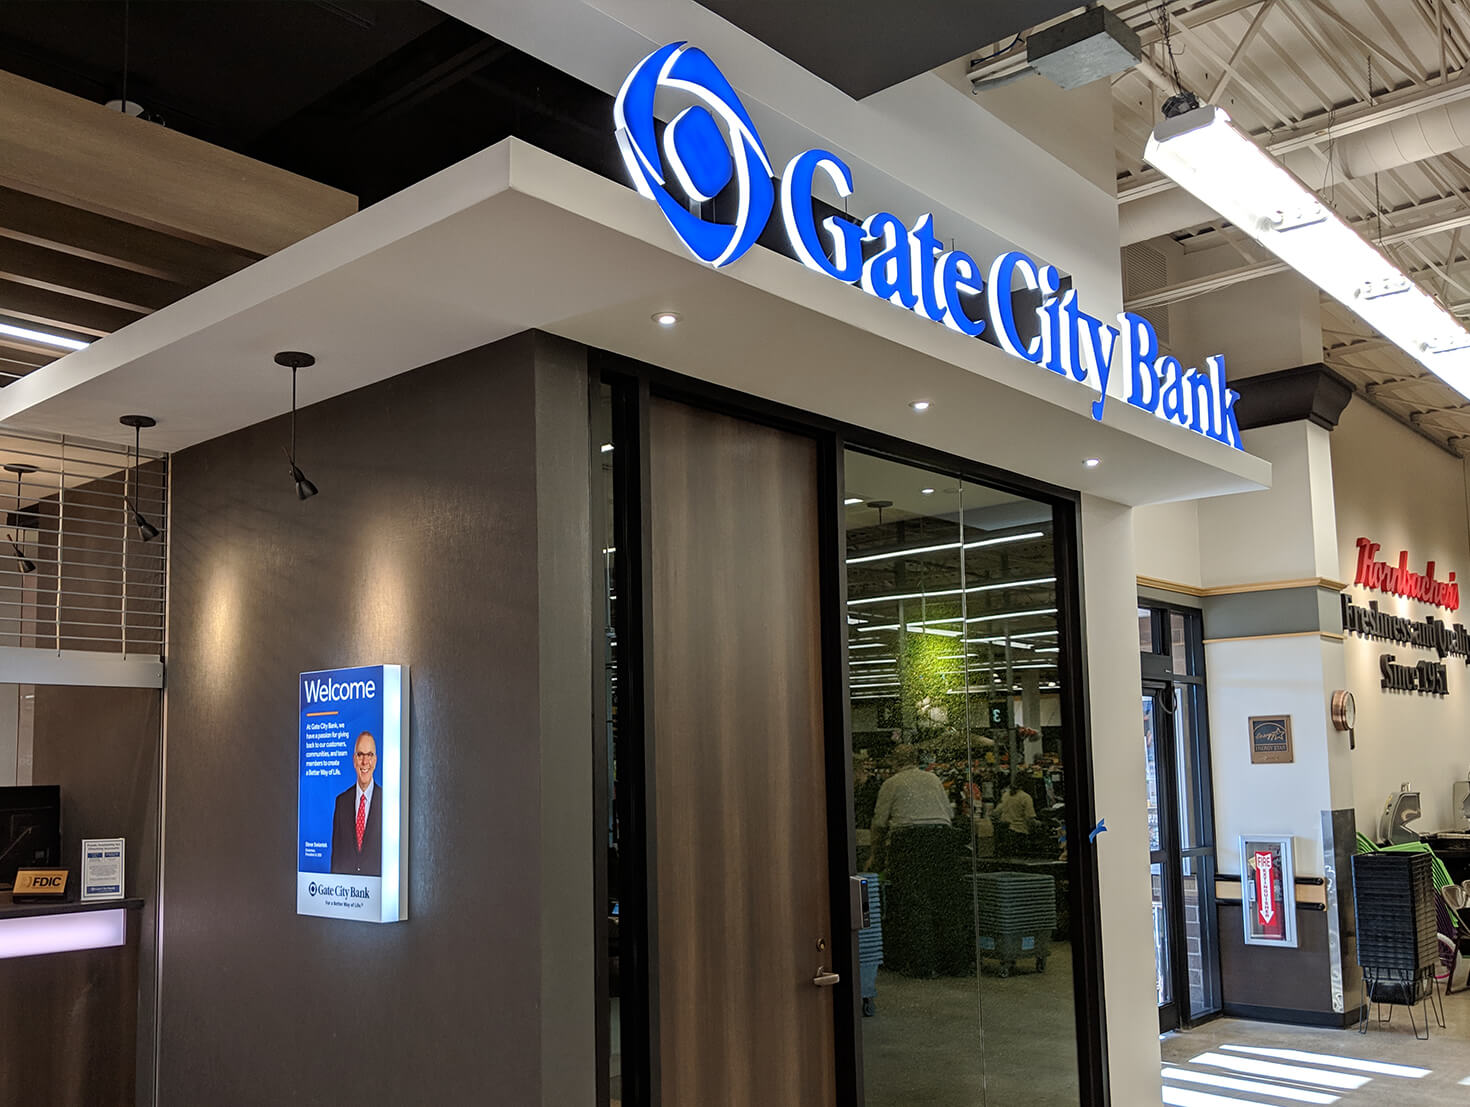 Gate City Bank Moorhead MN Hornbacher's Interior Edge lit letters on rail and edge lit wall cabinets